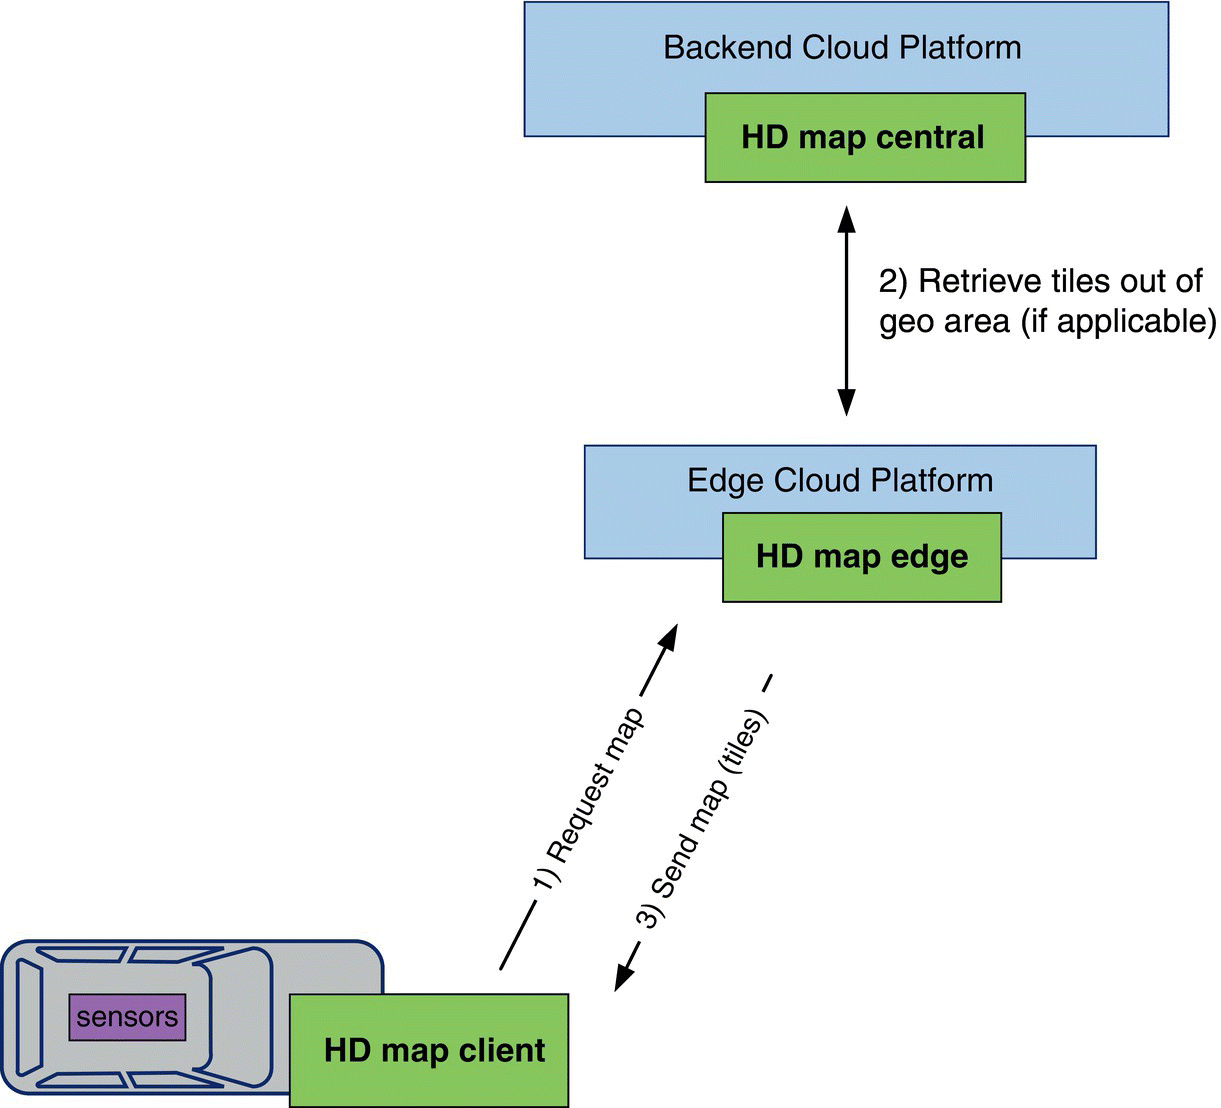 Schematic with an arrow for Request map from HD map client to HD map edge, a two-headed arrow for Retrieve tiles out of geo area between HP map central and HD map edge, and an arrow for Send map from HD map edge to HD map client.